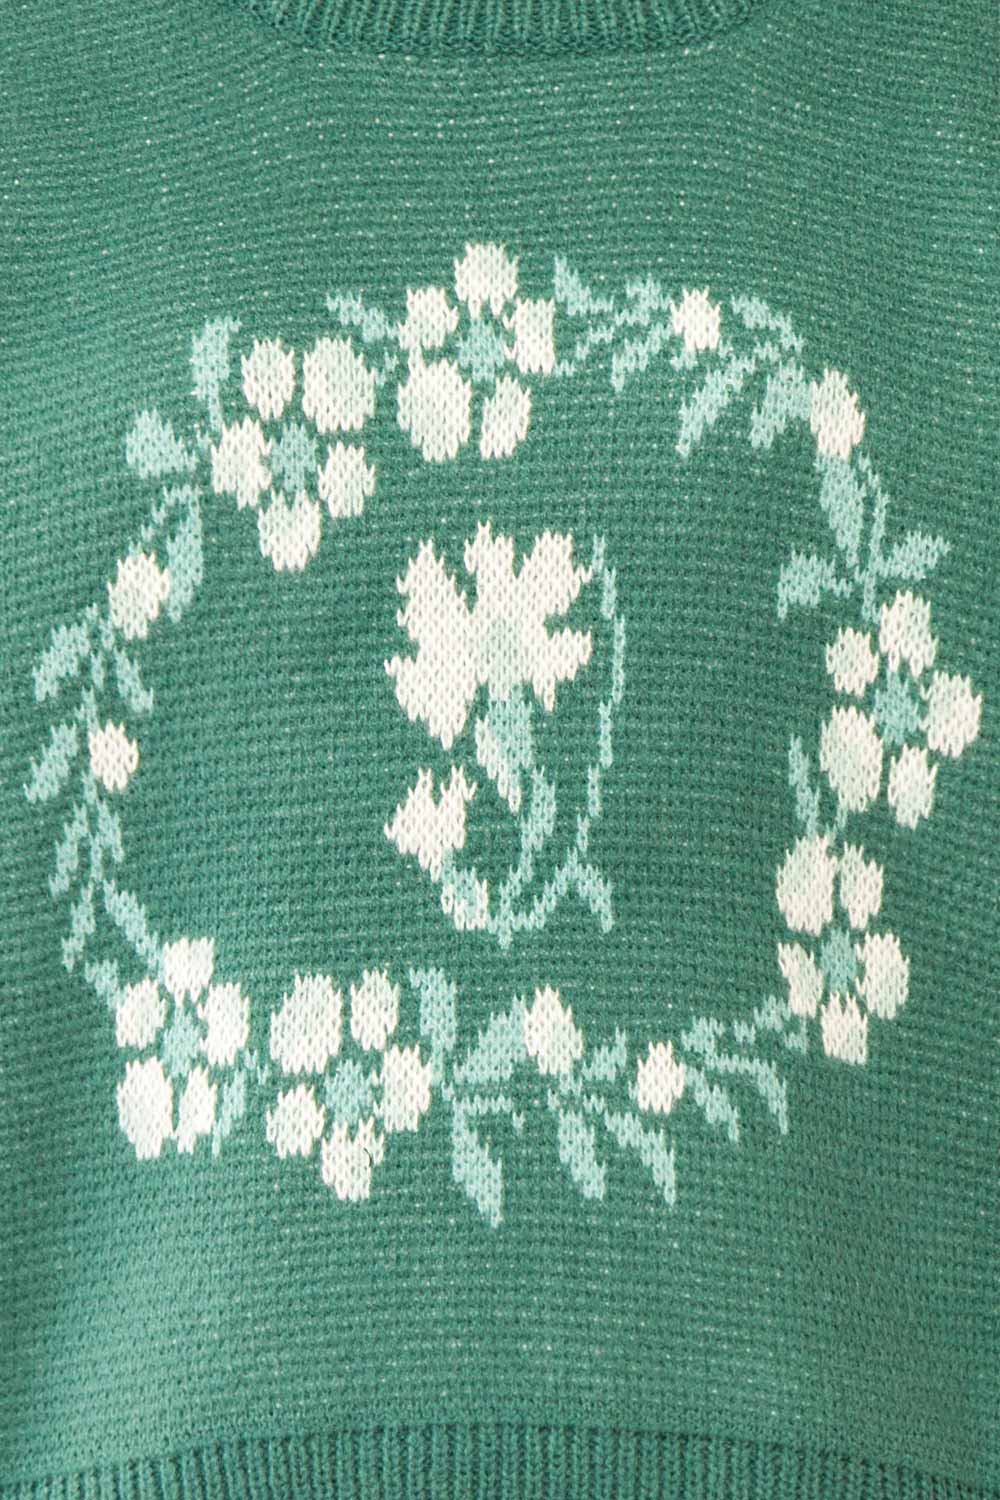 Monrovia Green Floral Patterned Knit Sweater | Boutique 1861 fabric 